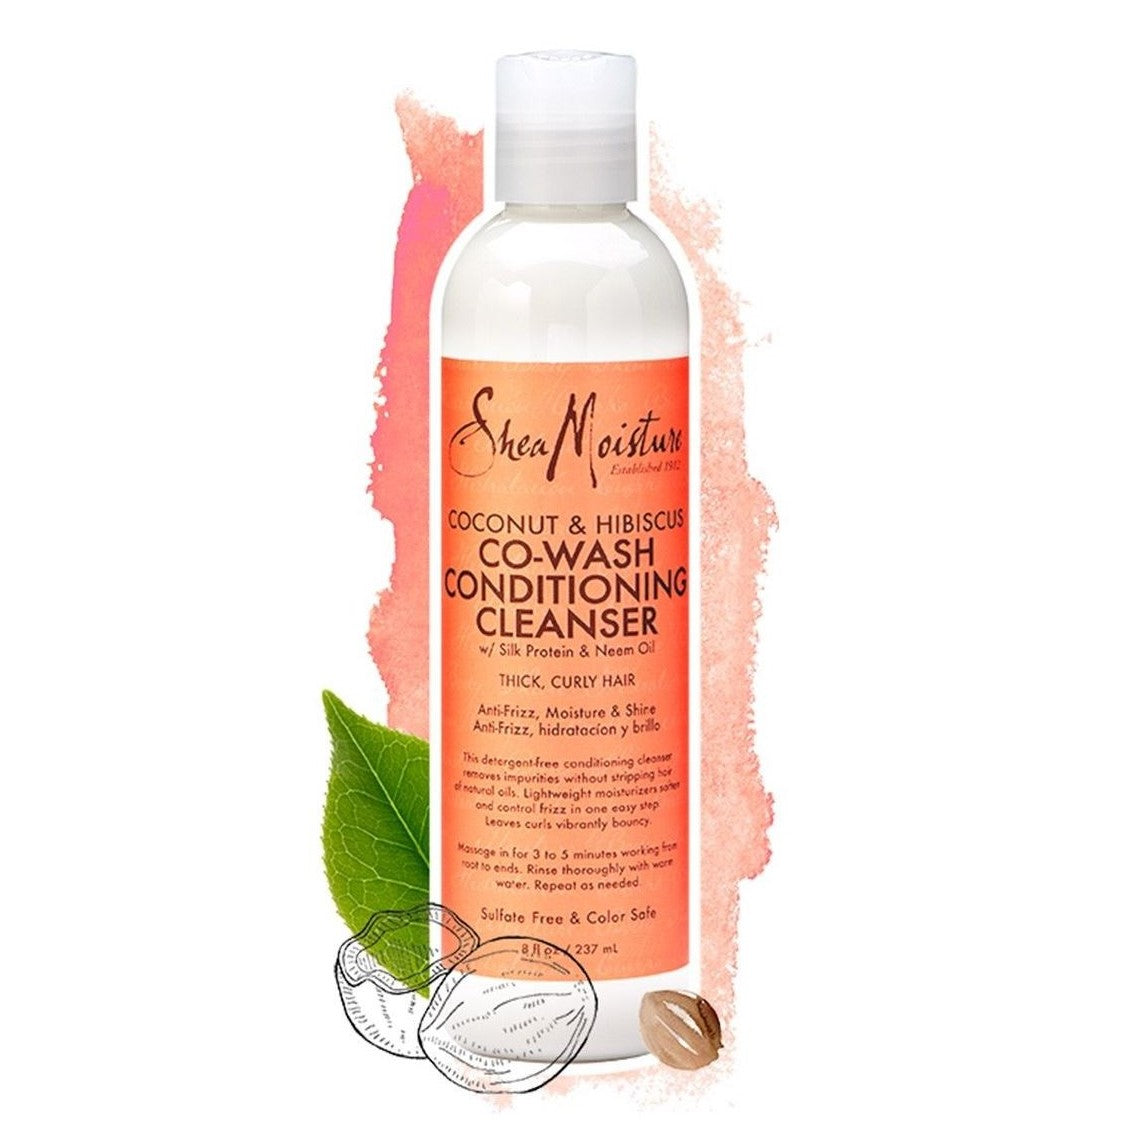 Shea Moisture Coconut & Hibiscus Co-Wash Conditioning Cleanser 12 oz